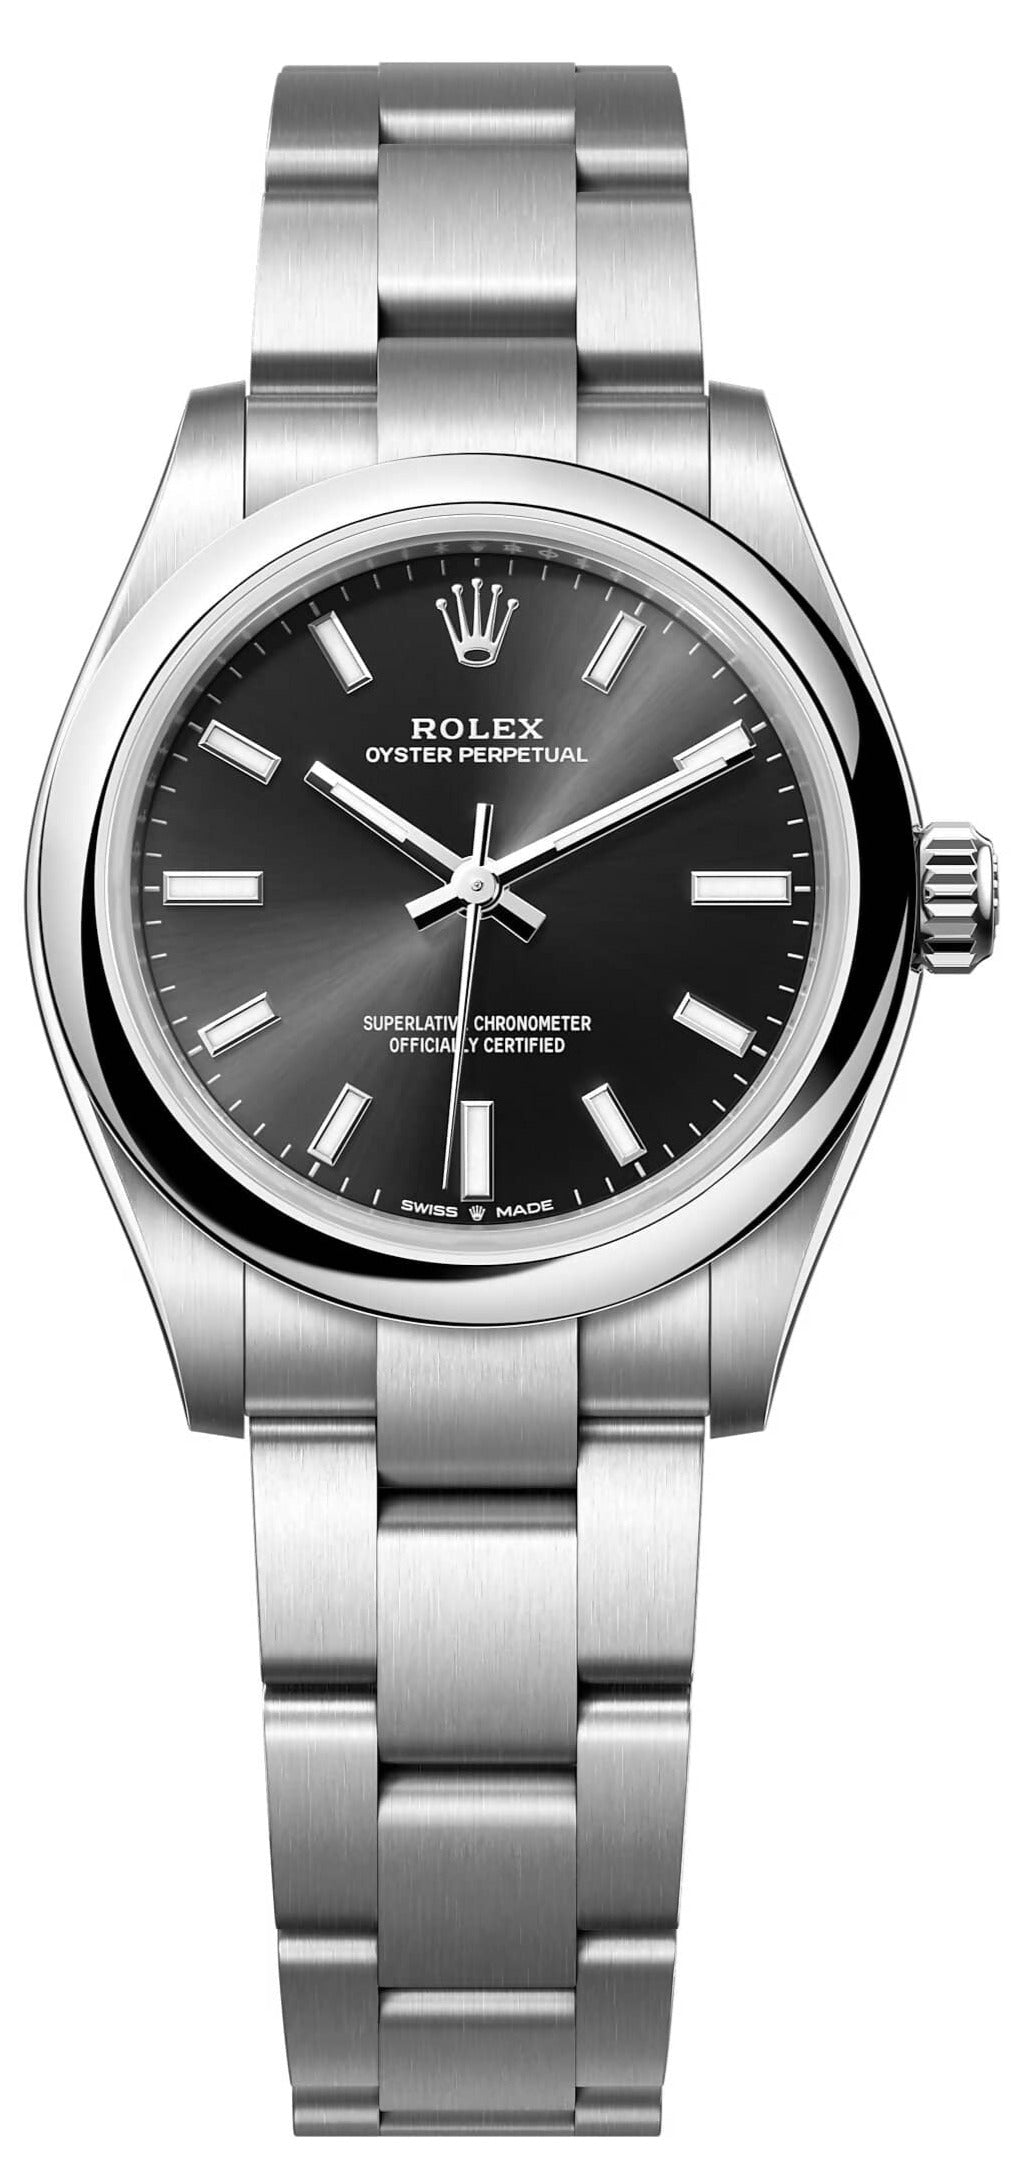 Rolex Oyster perpetual 31, Oyster, 31 mm, Oystersteel, Bright Black dial, Oyster bracelet, ref 277200